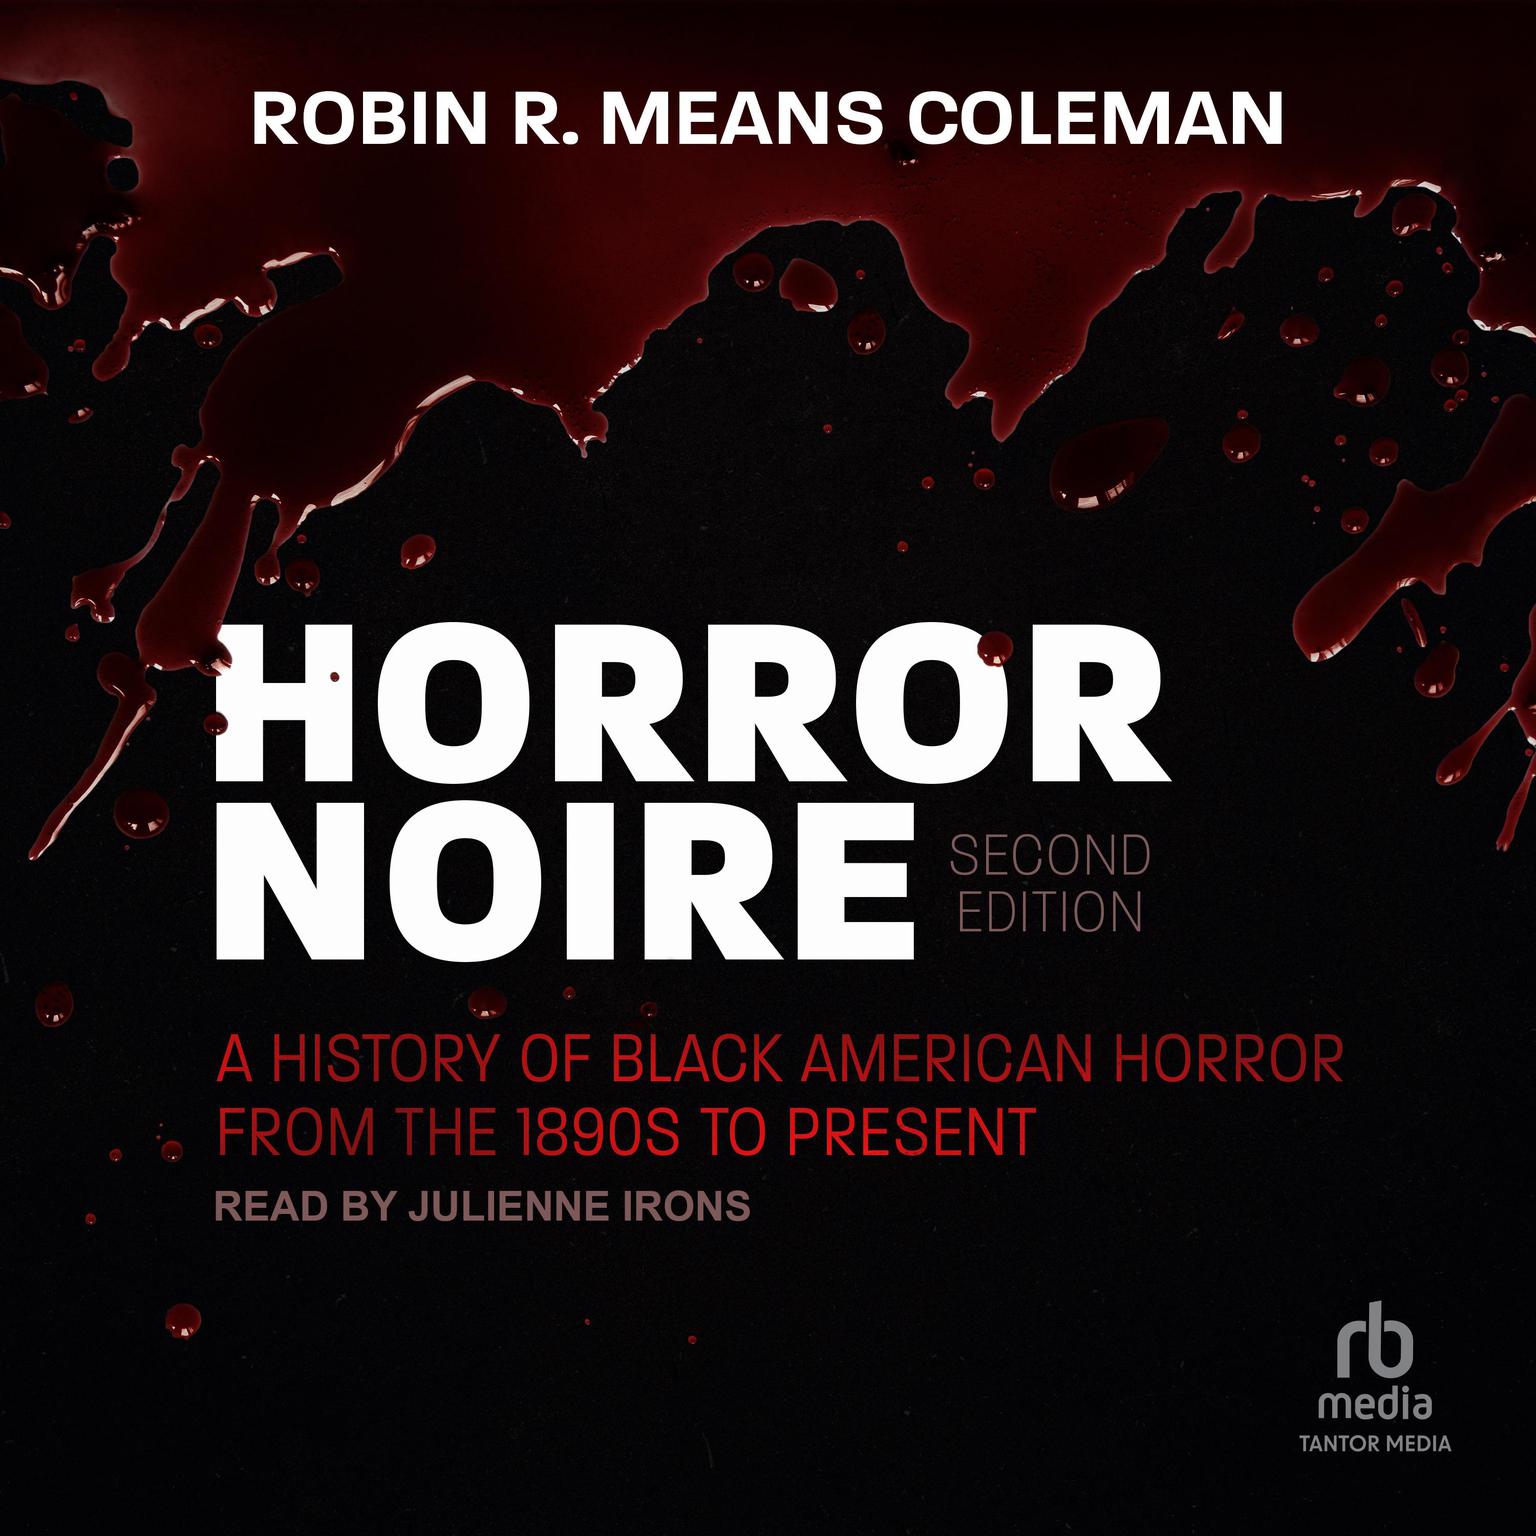 Horror Noire: A History of Black American Horror from the 1890s to Present 2nd Edition Audiobook, by Robin R. Means Coleman